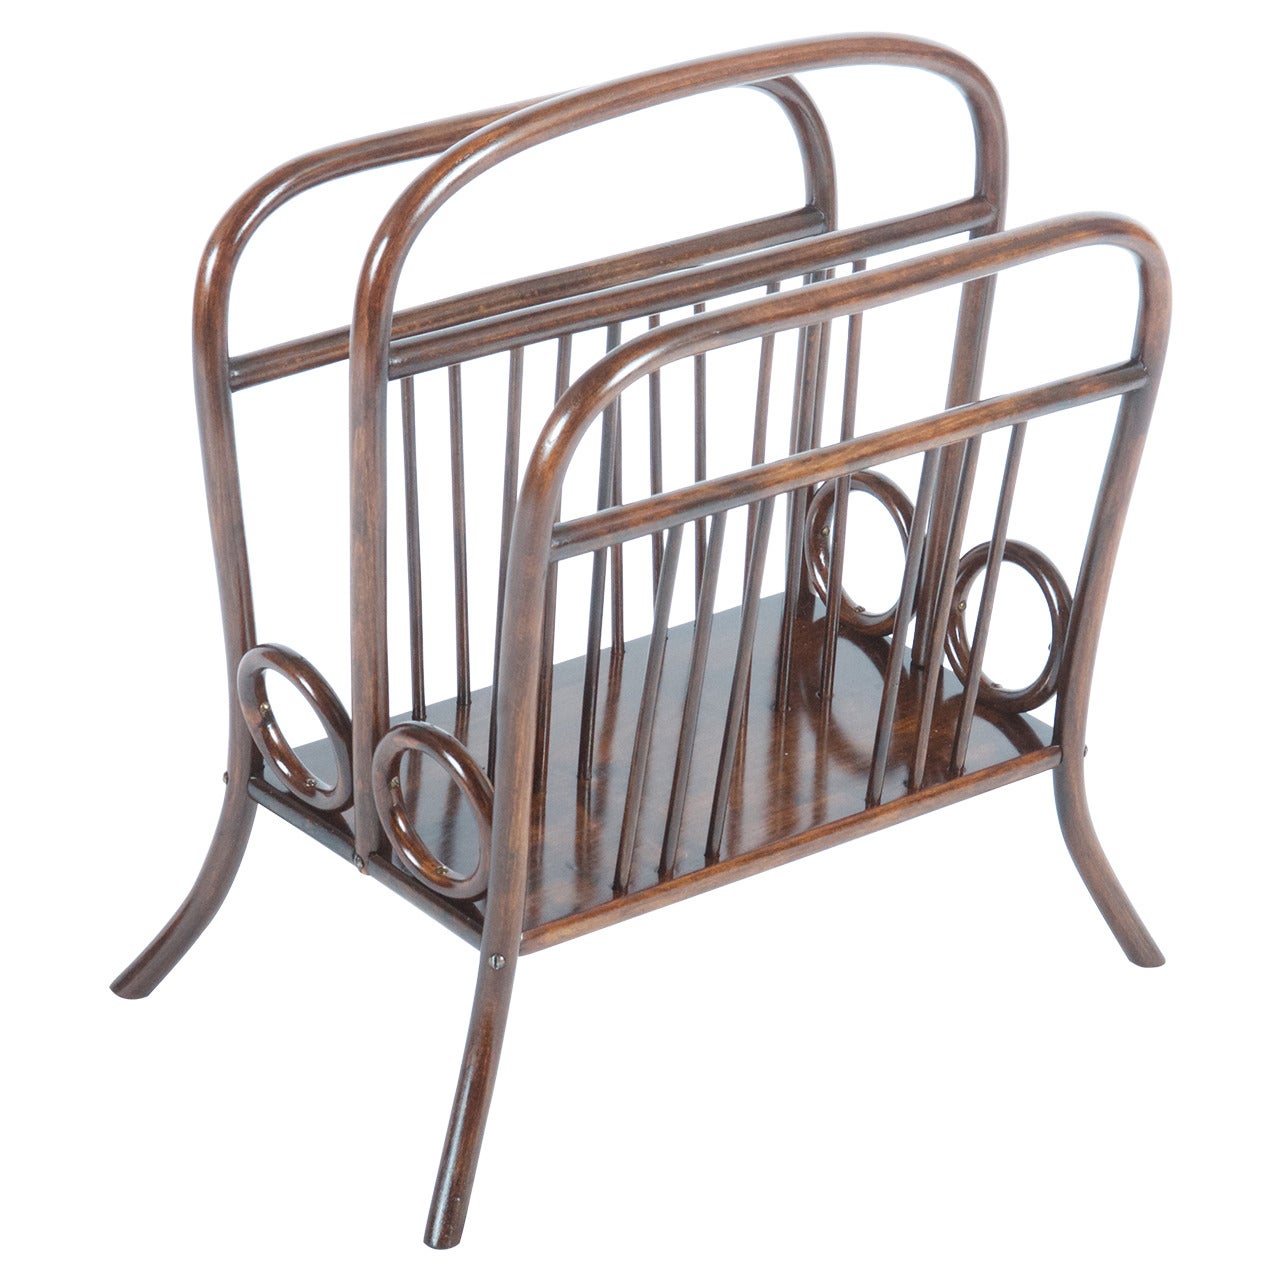 Thonet Bentwood Music or Newspaper Rack, Catalogue Number 33